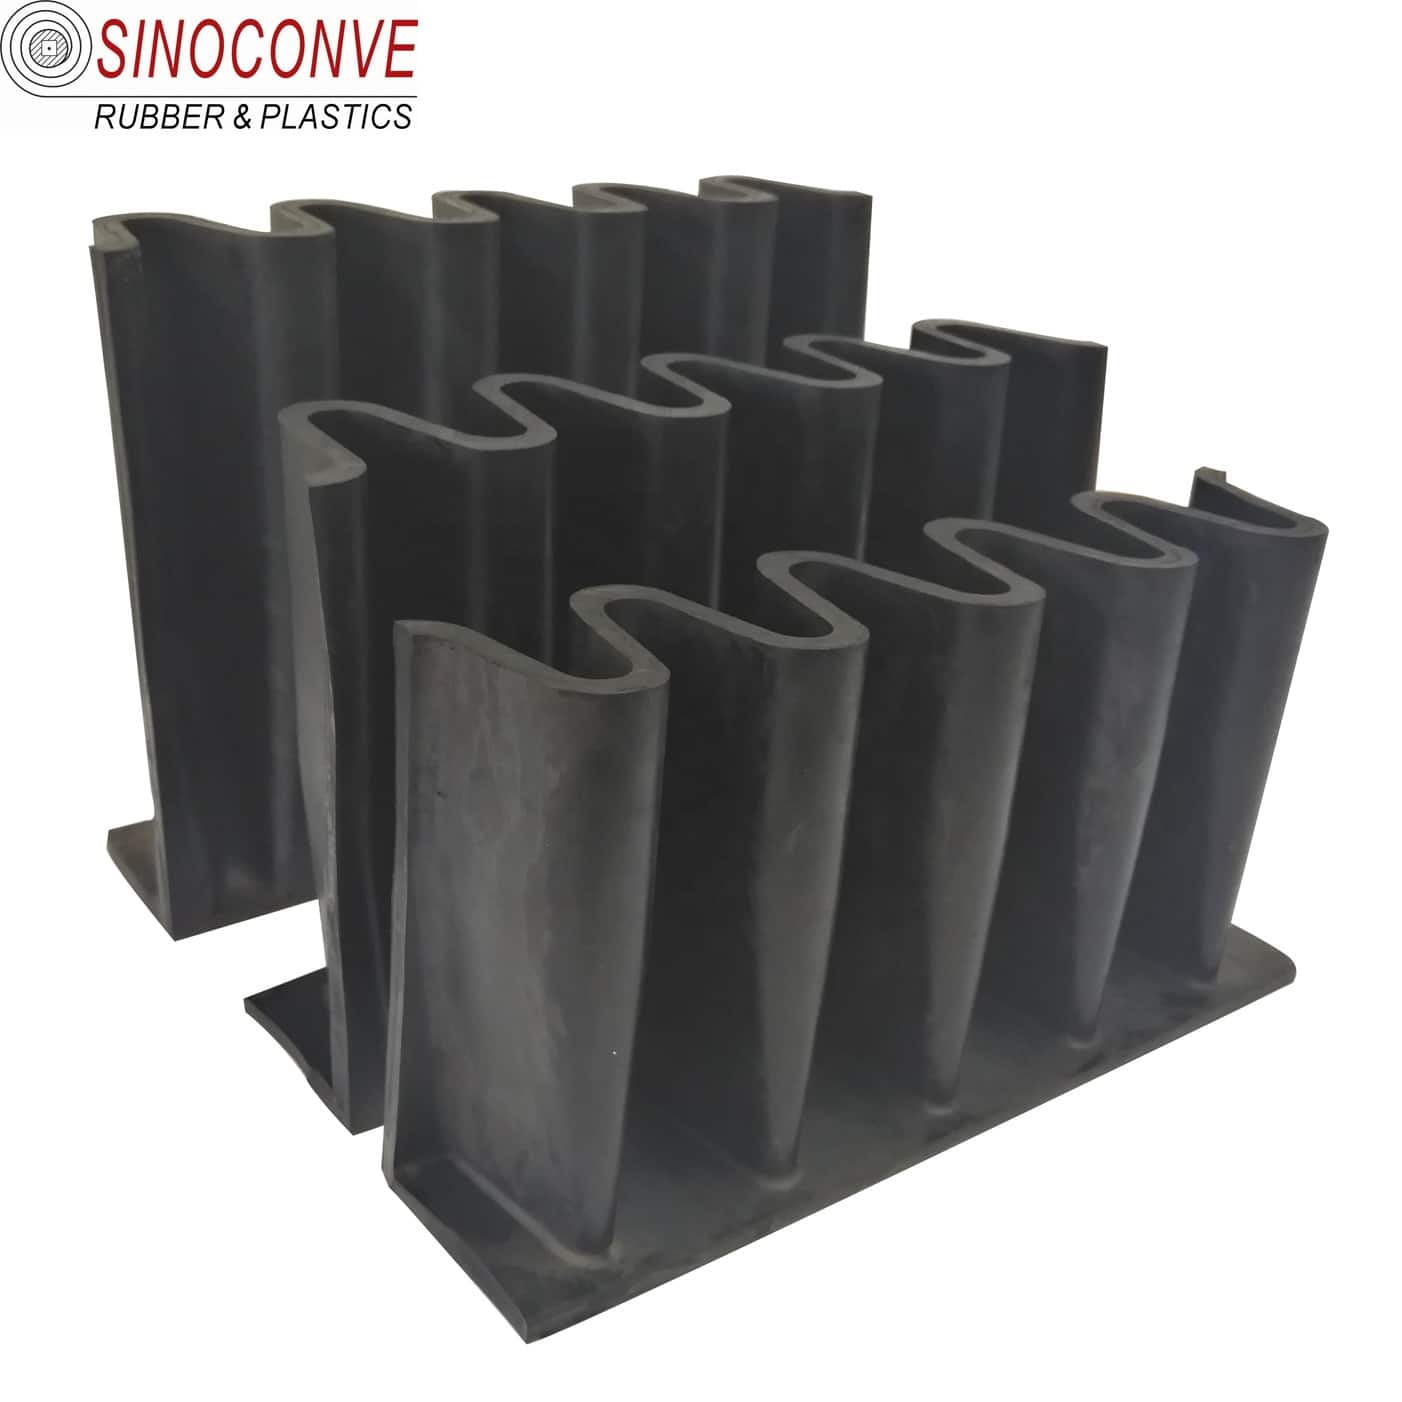 Steep angle cleat sidewall conveyor belt skirt cleated ribbed rubber corrugated conveyor belt